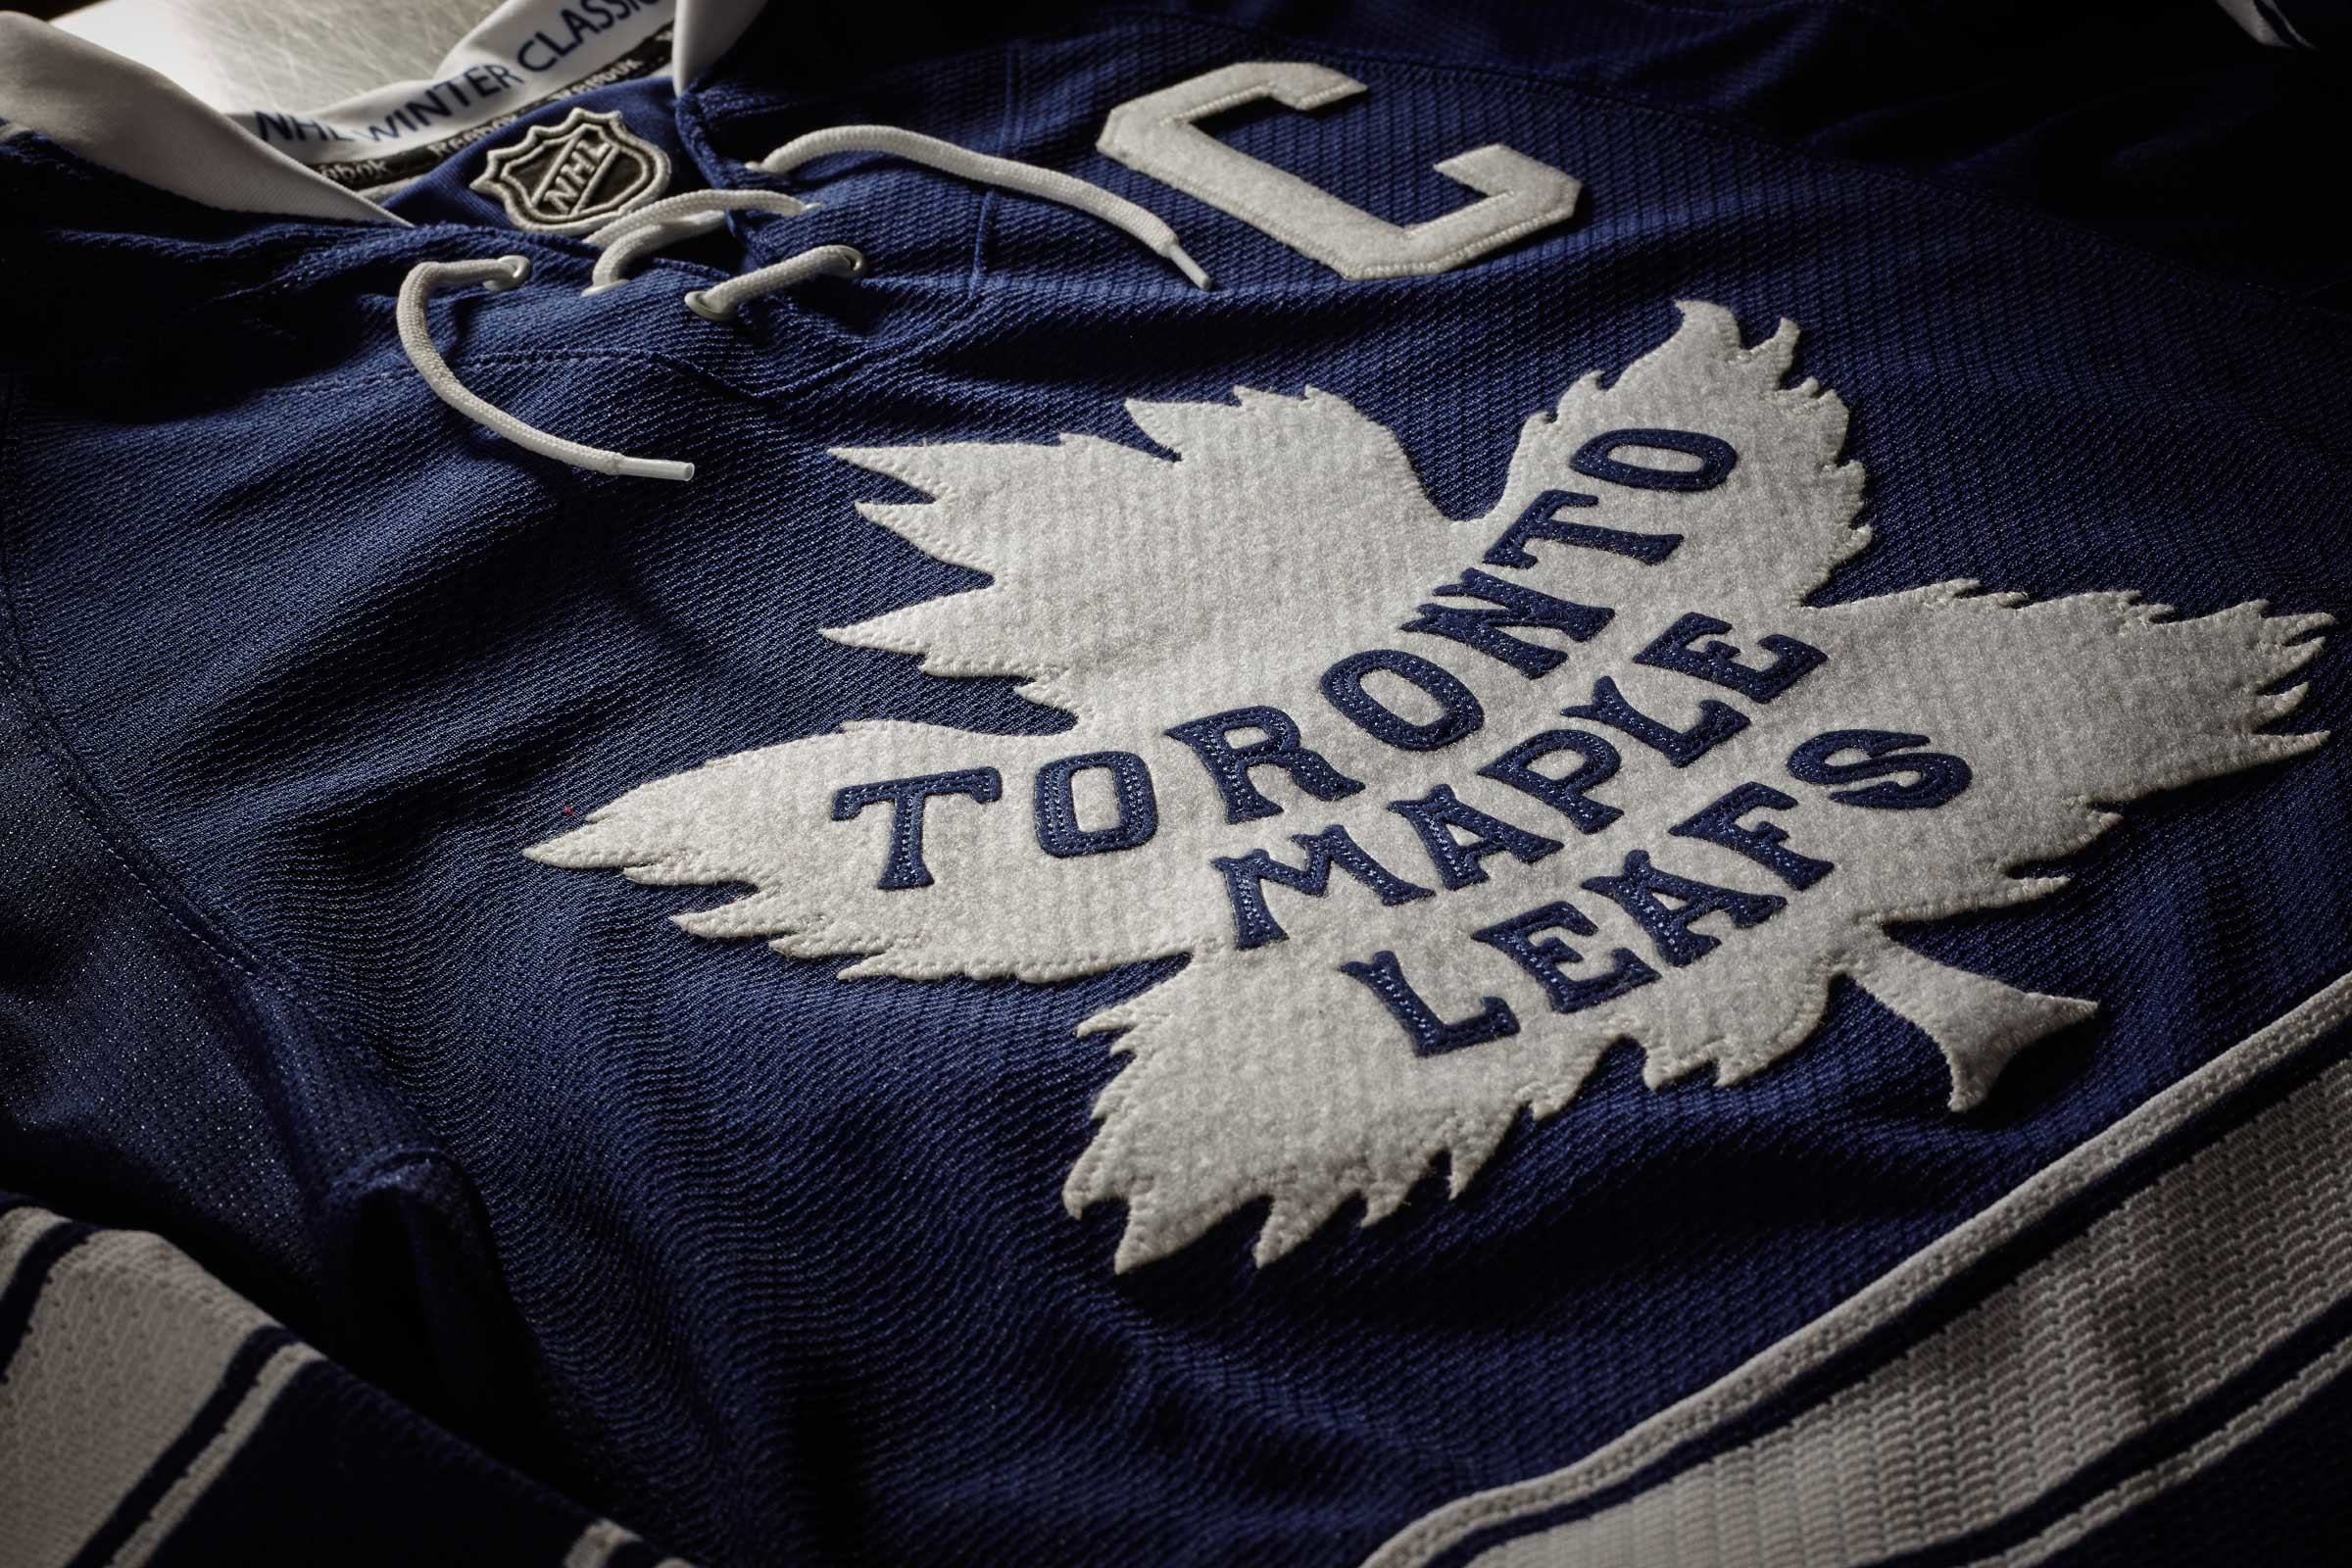 2400x1600 Anybody got an cool wallpapers they want to share? : leafs